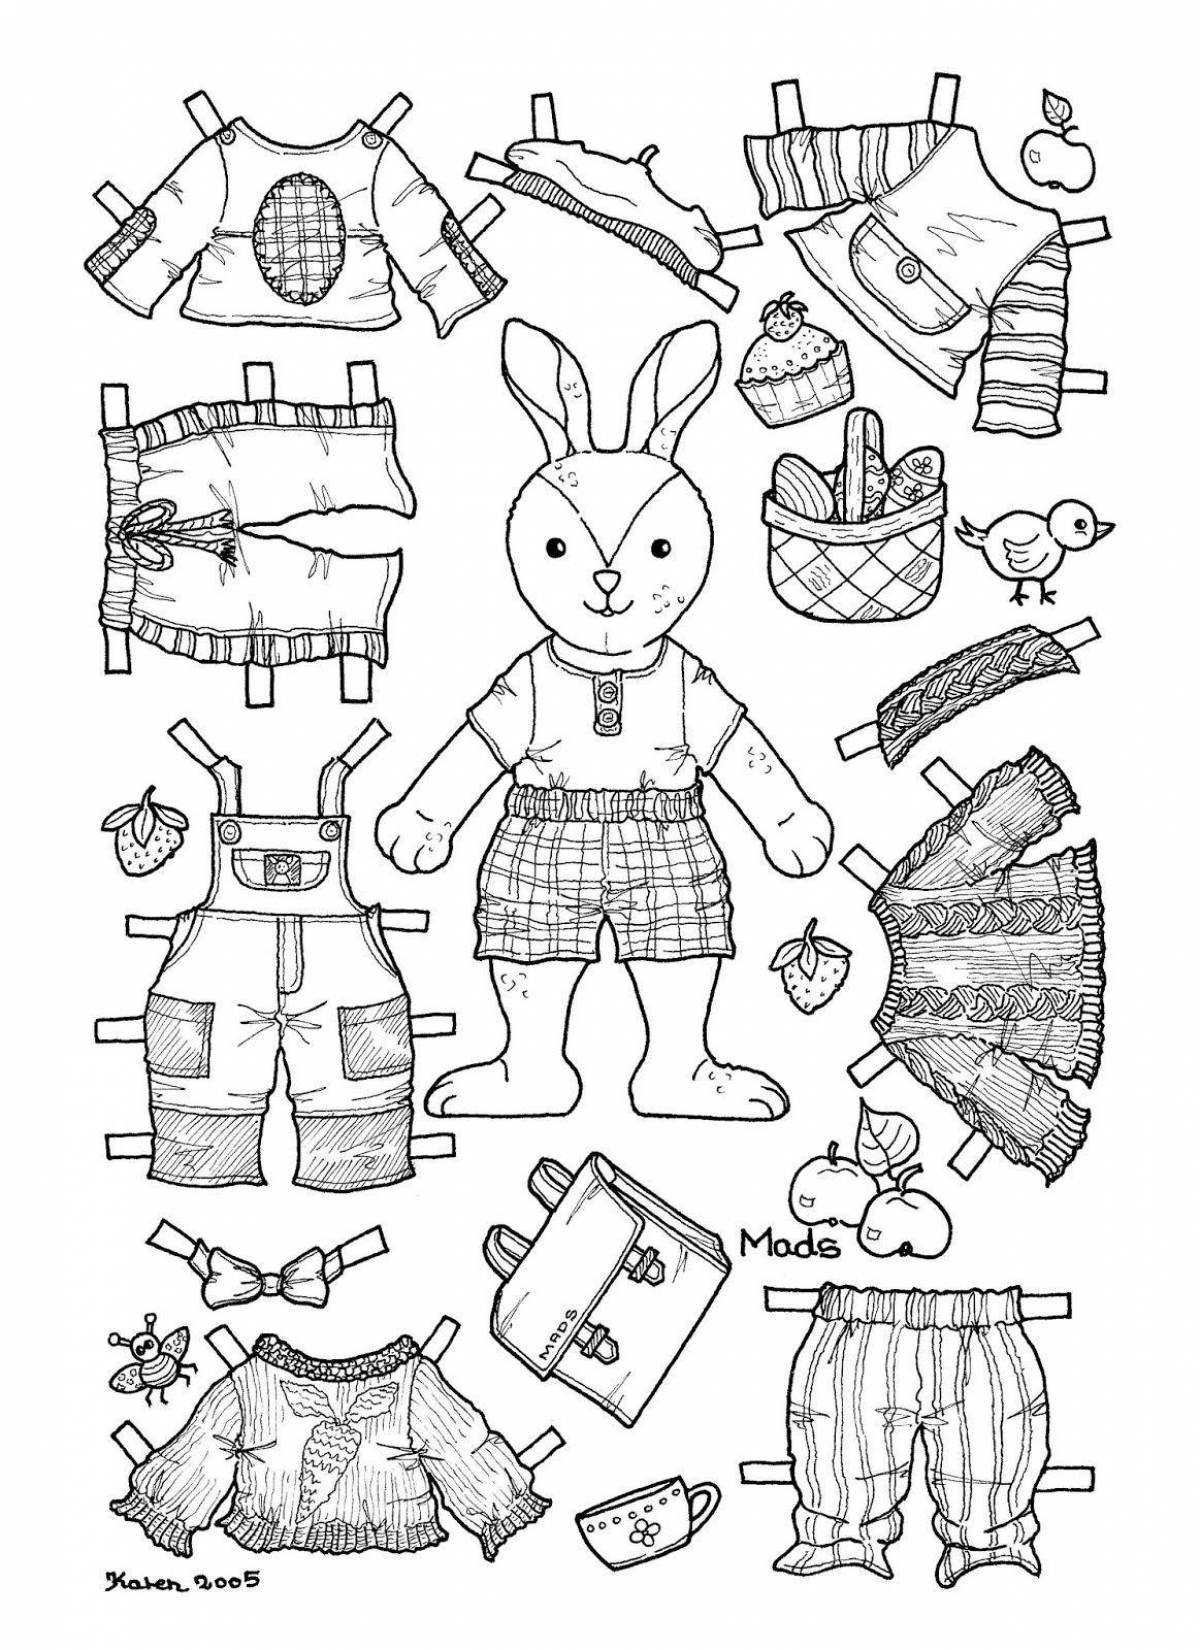 Funny cat coloring pages with clothes to cut out